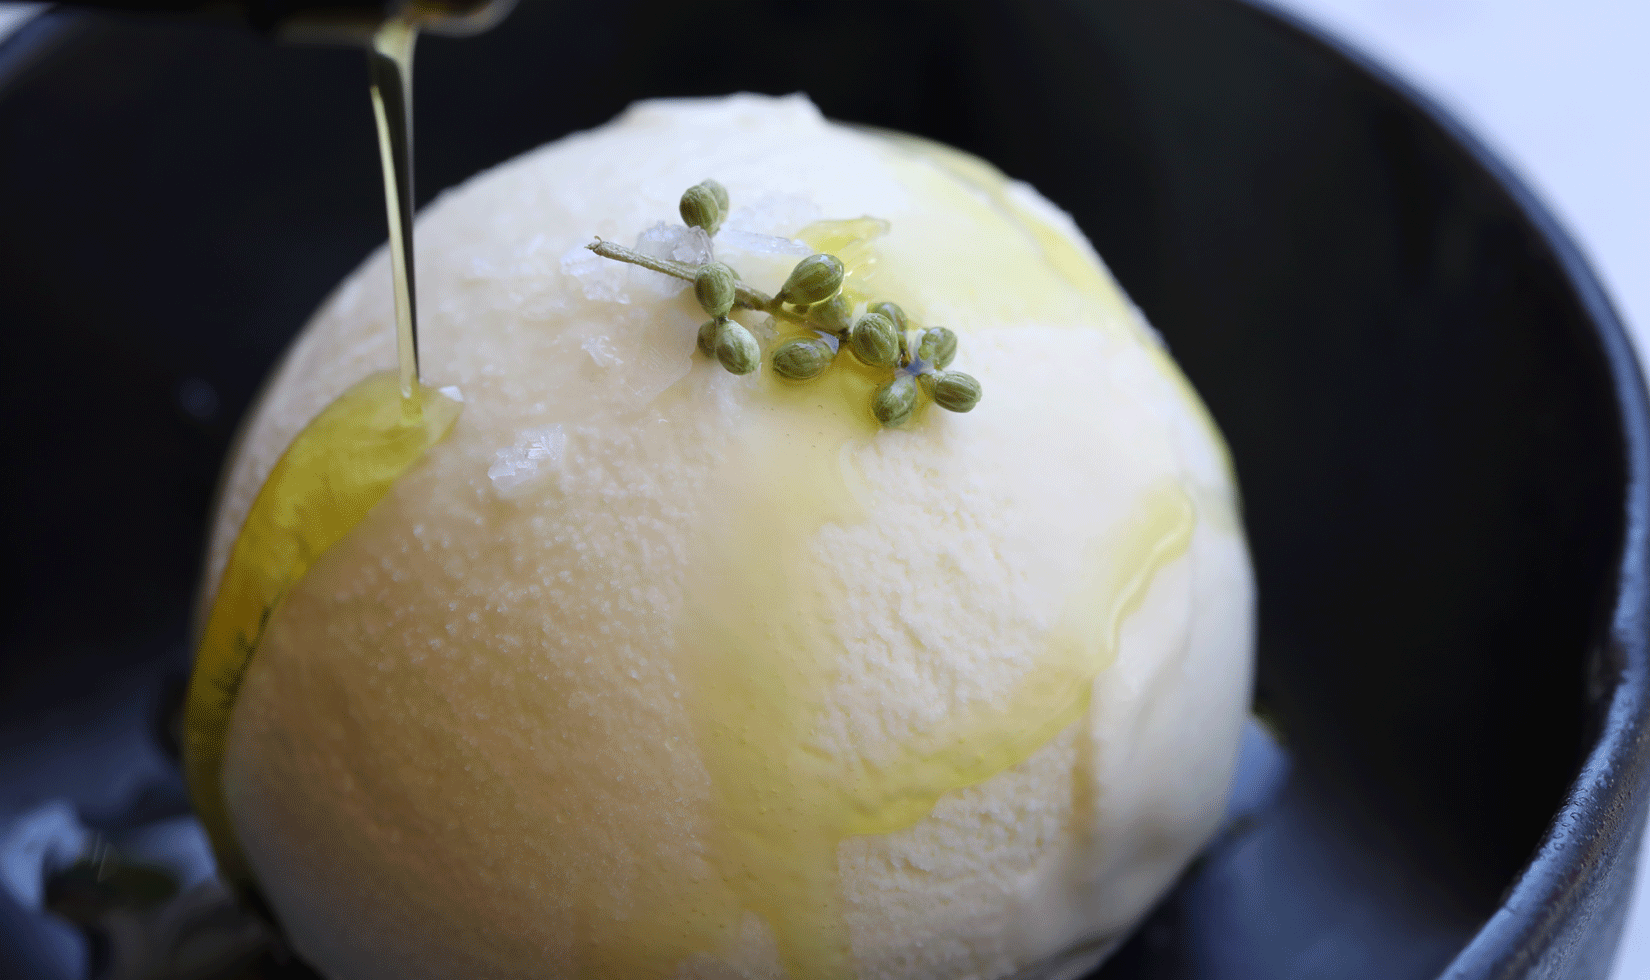 Jordan olive oil drizzled over olive oil ice cream; learn how to make olive oil ice cream at home